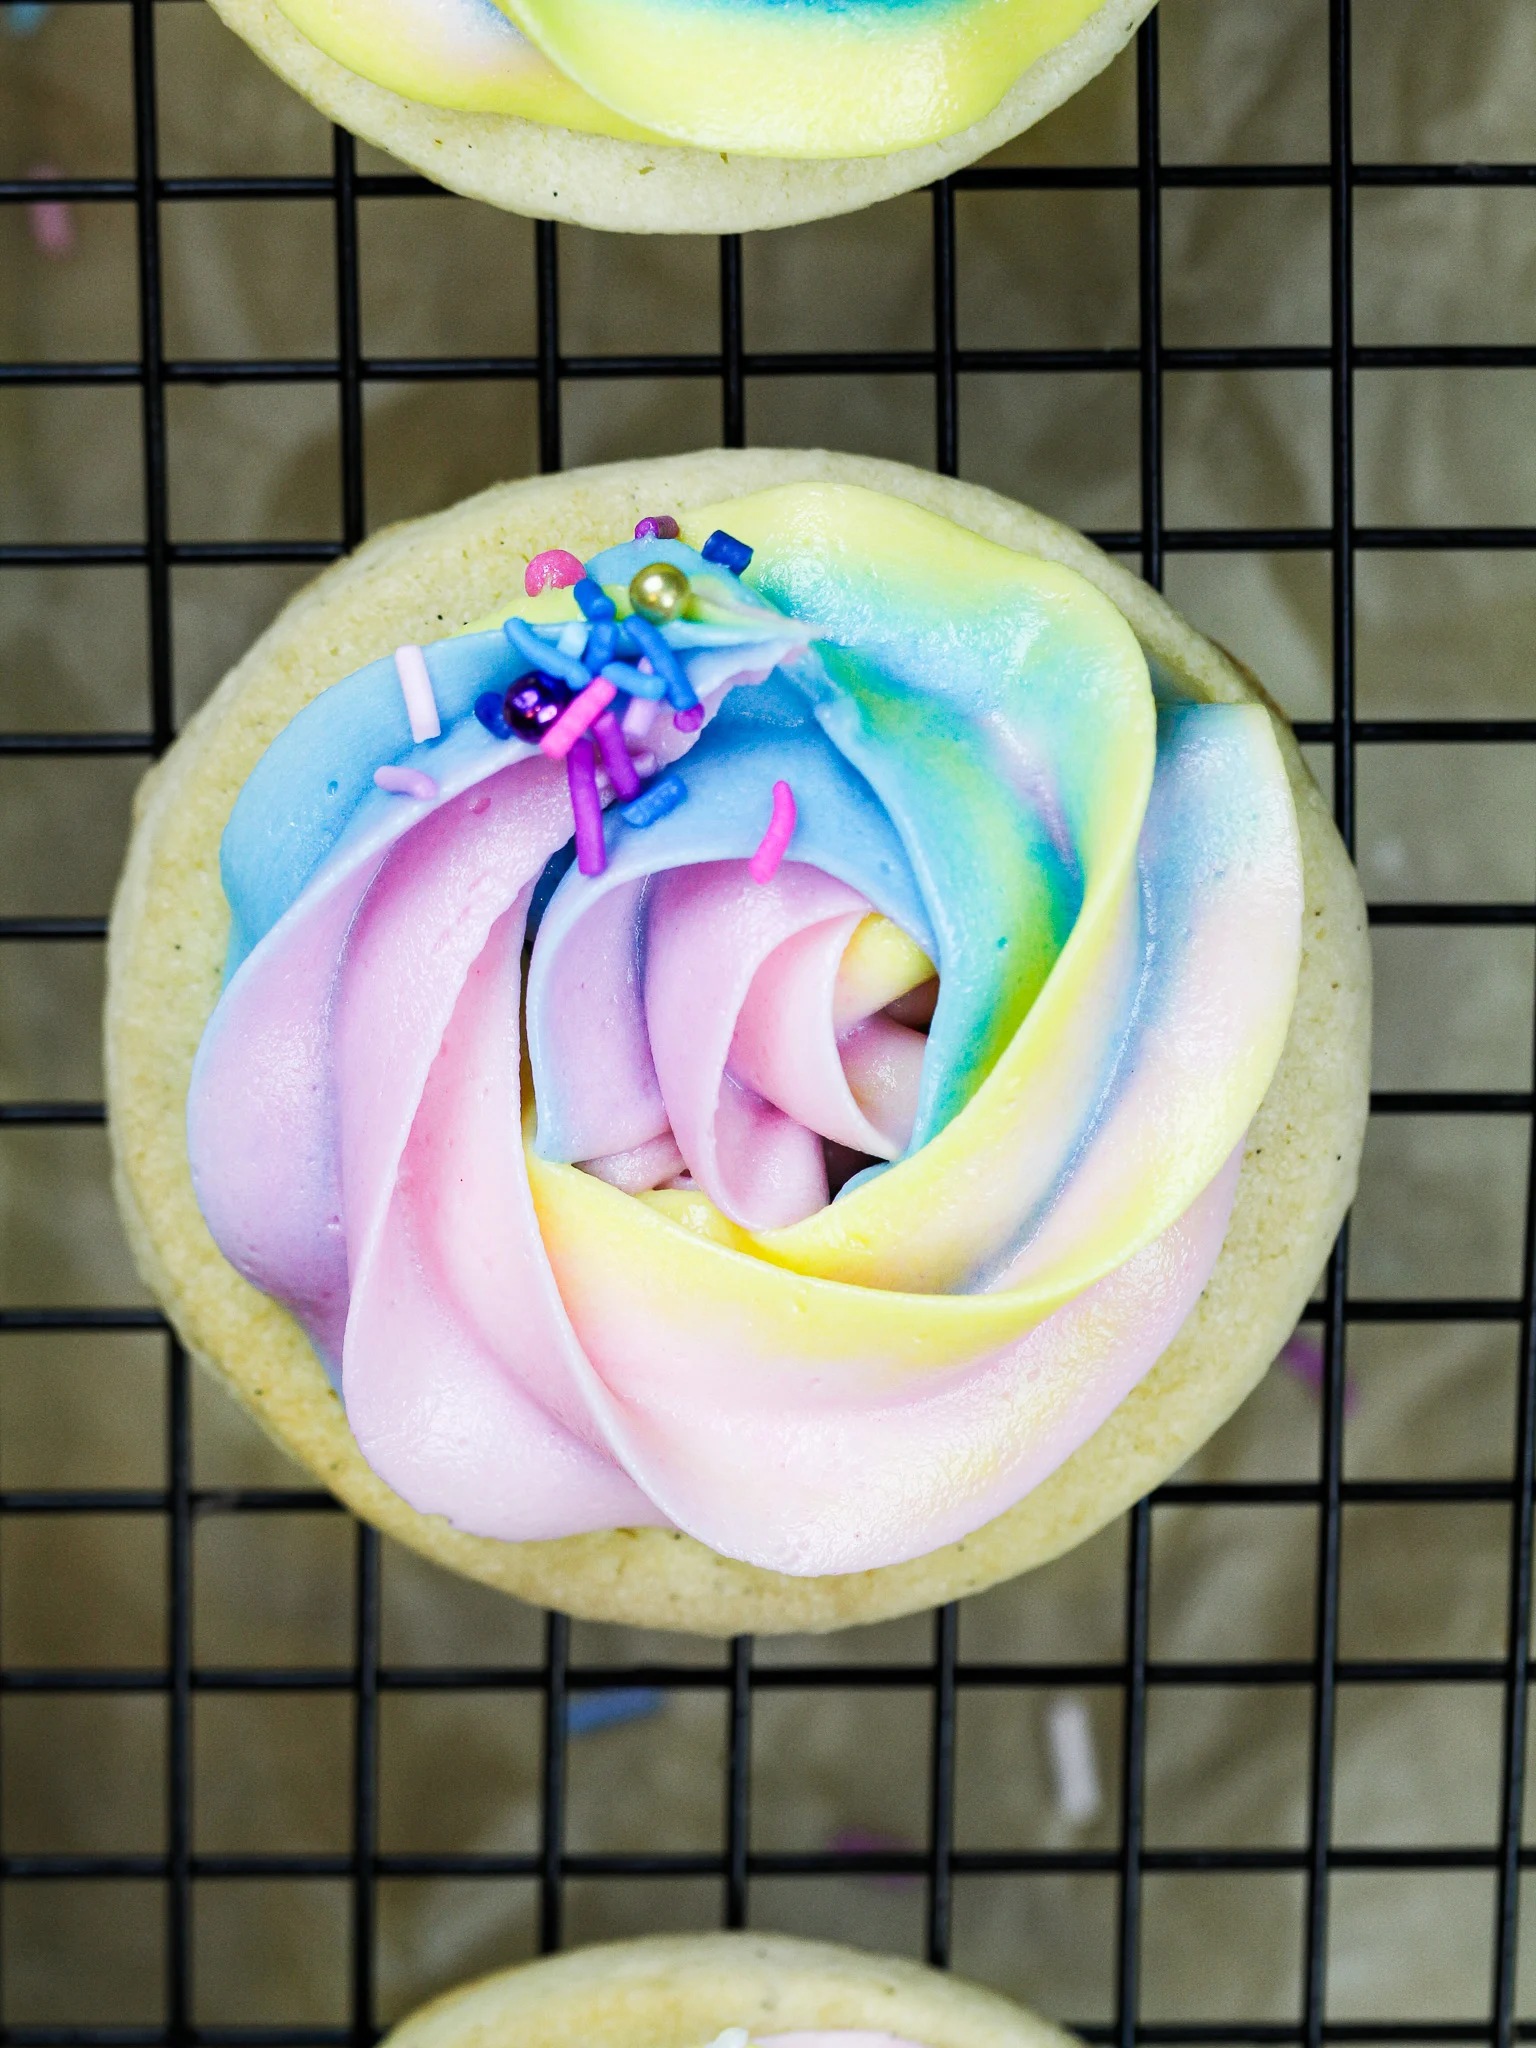 image of a buttercream cookie that's been decorated with colorful buttercream frosting